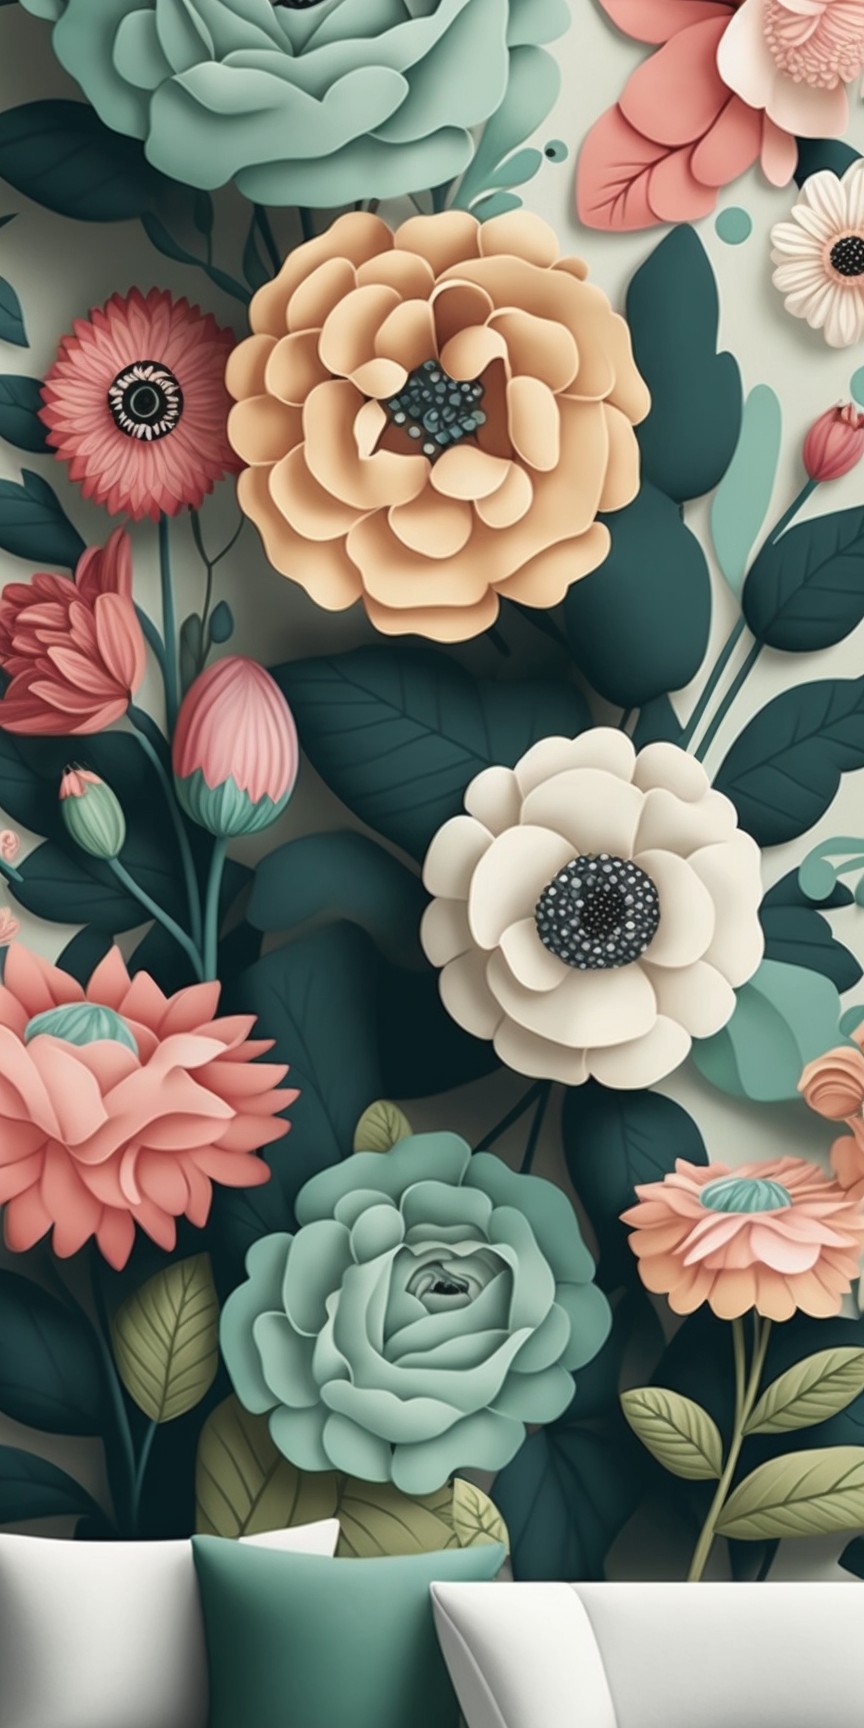 Comfortable flower wallpaper with color matching